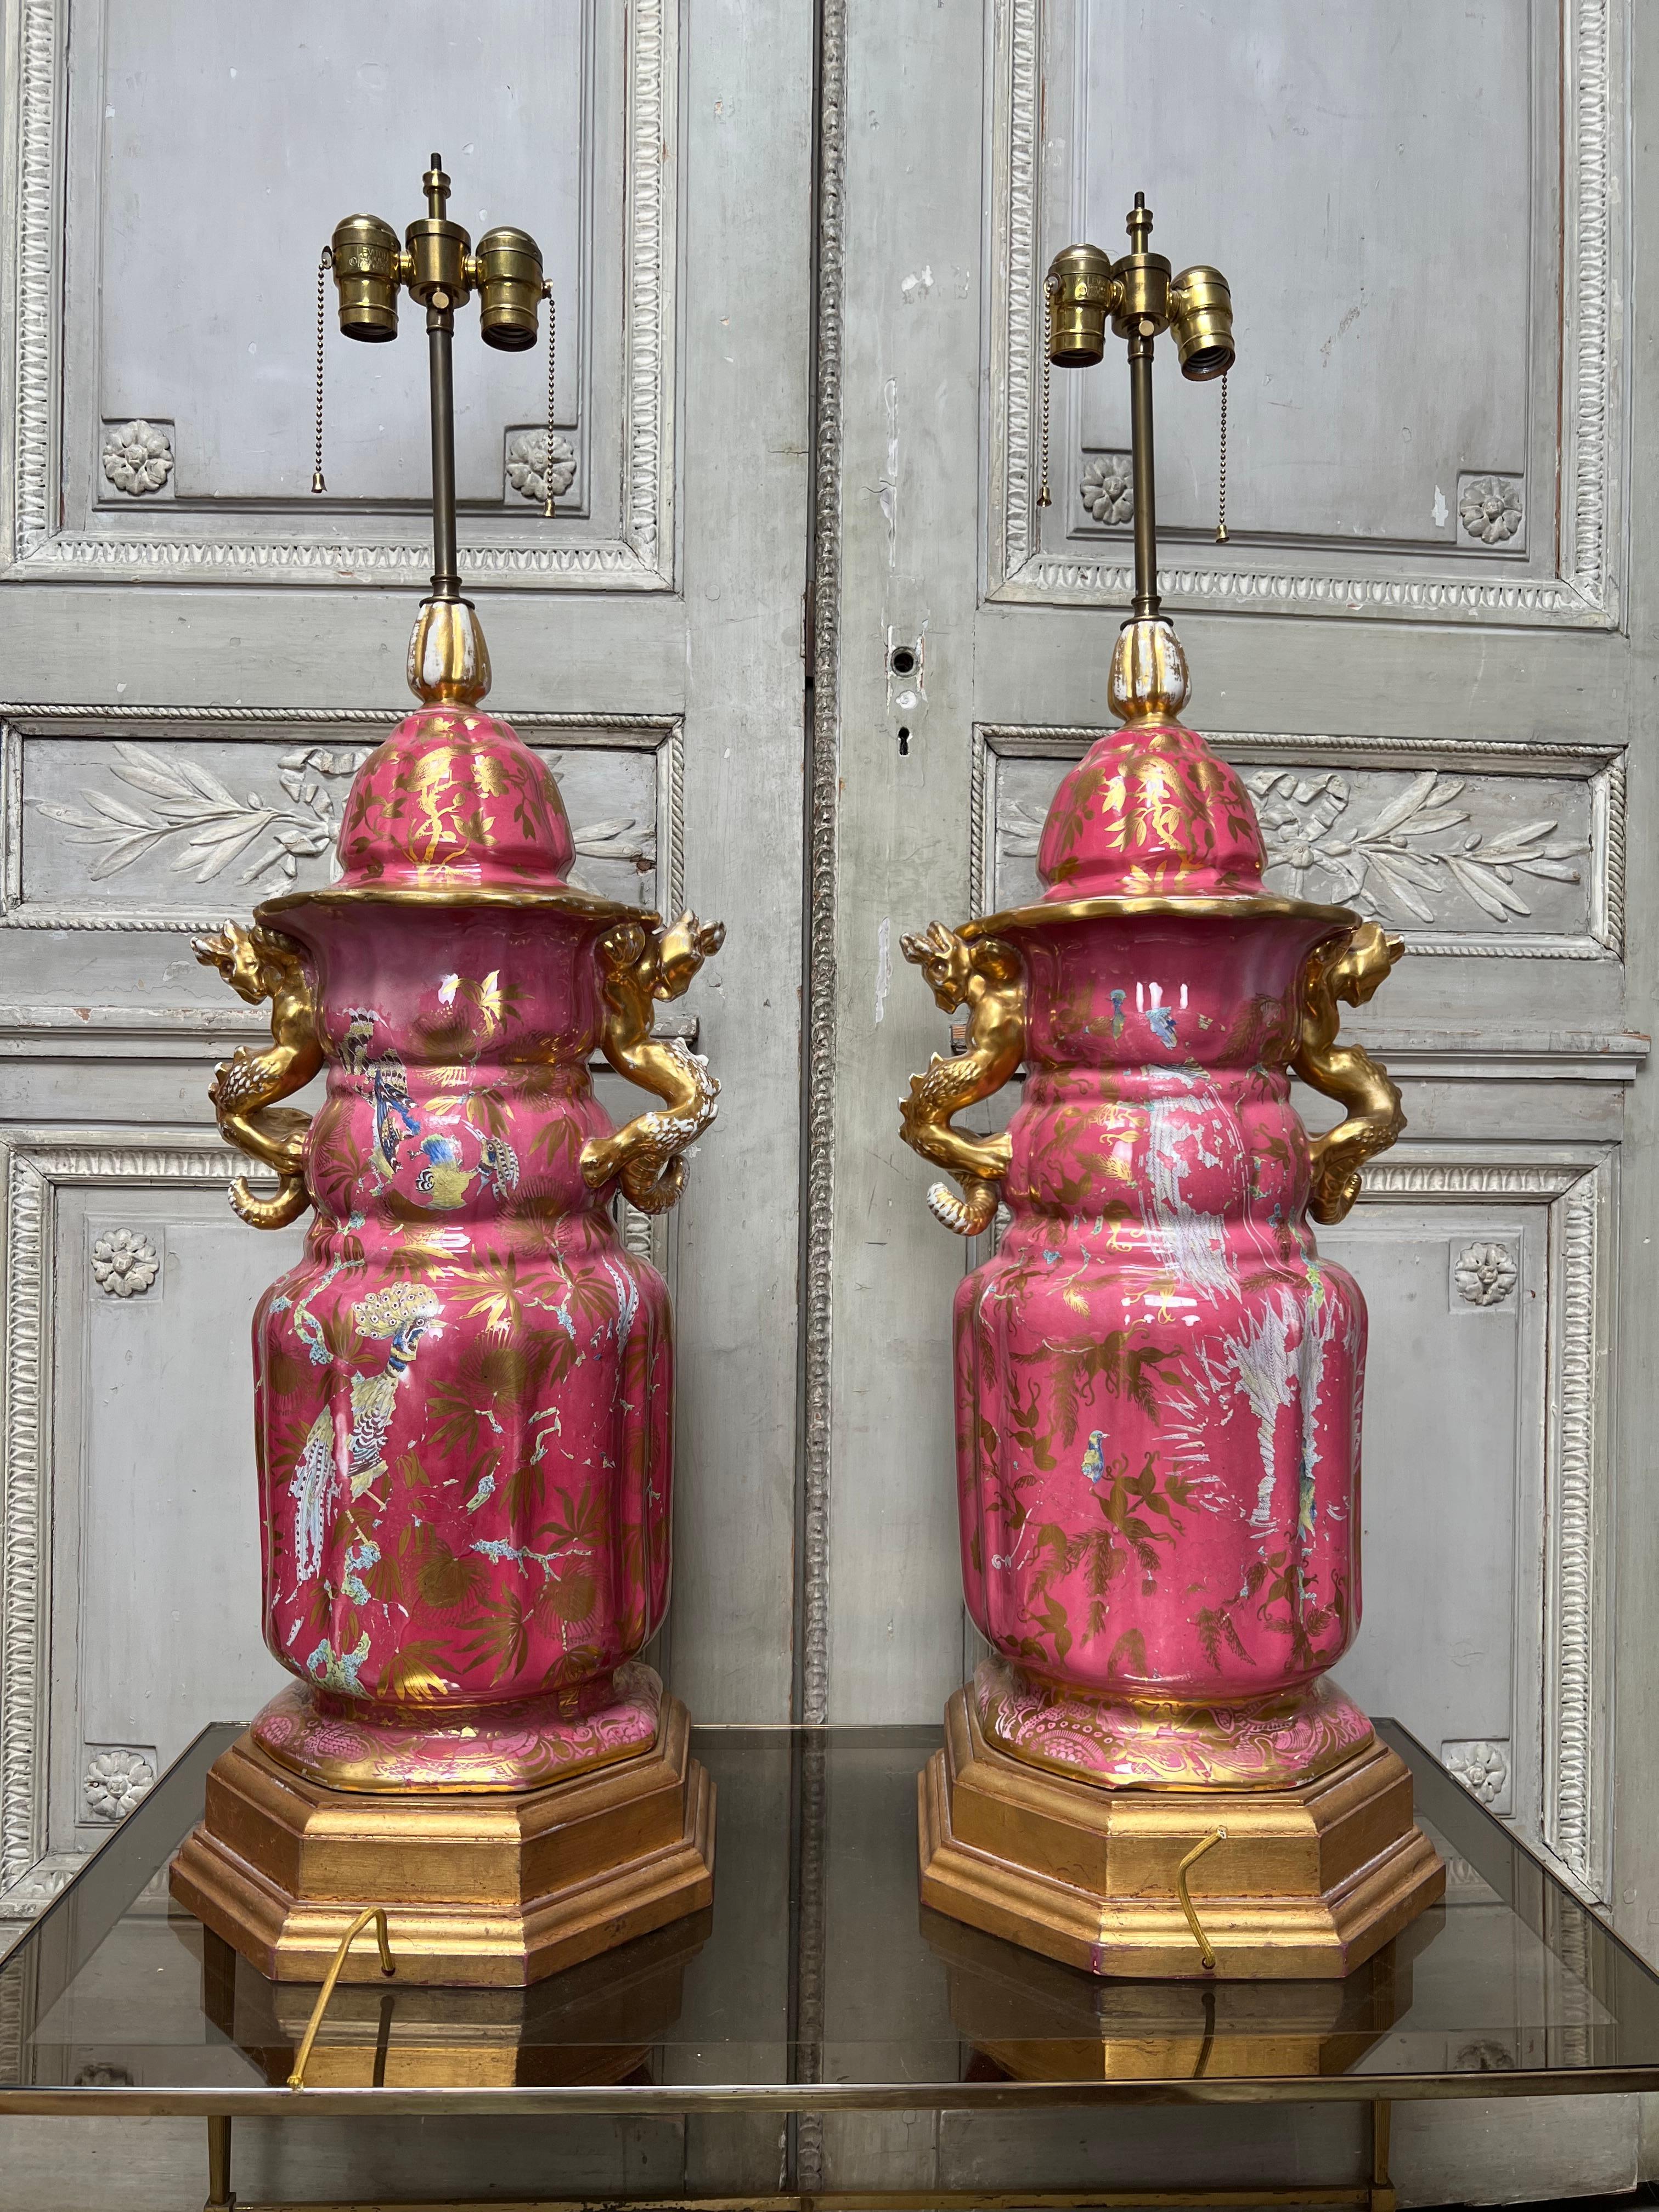 A pair very large English ironstone urns with lids that have been converted to lamp bases.  These pink glazed urns have a an overall gilded decoration as well as polychrome painted birds on the other side, but there is a lot of enamel loss to those